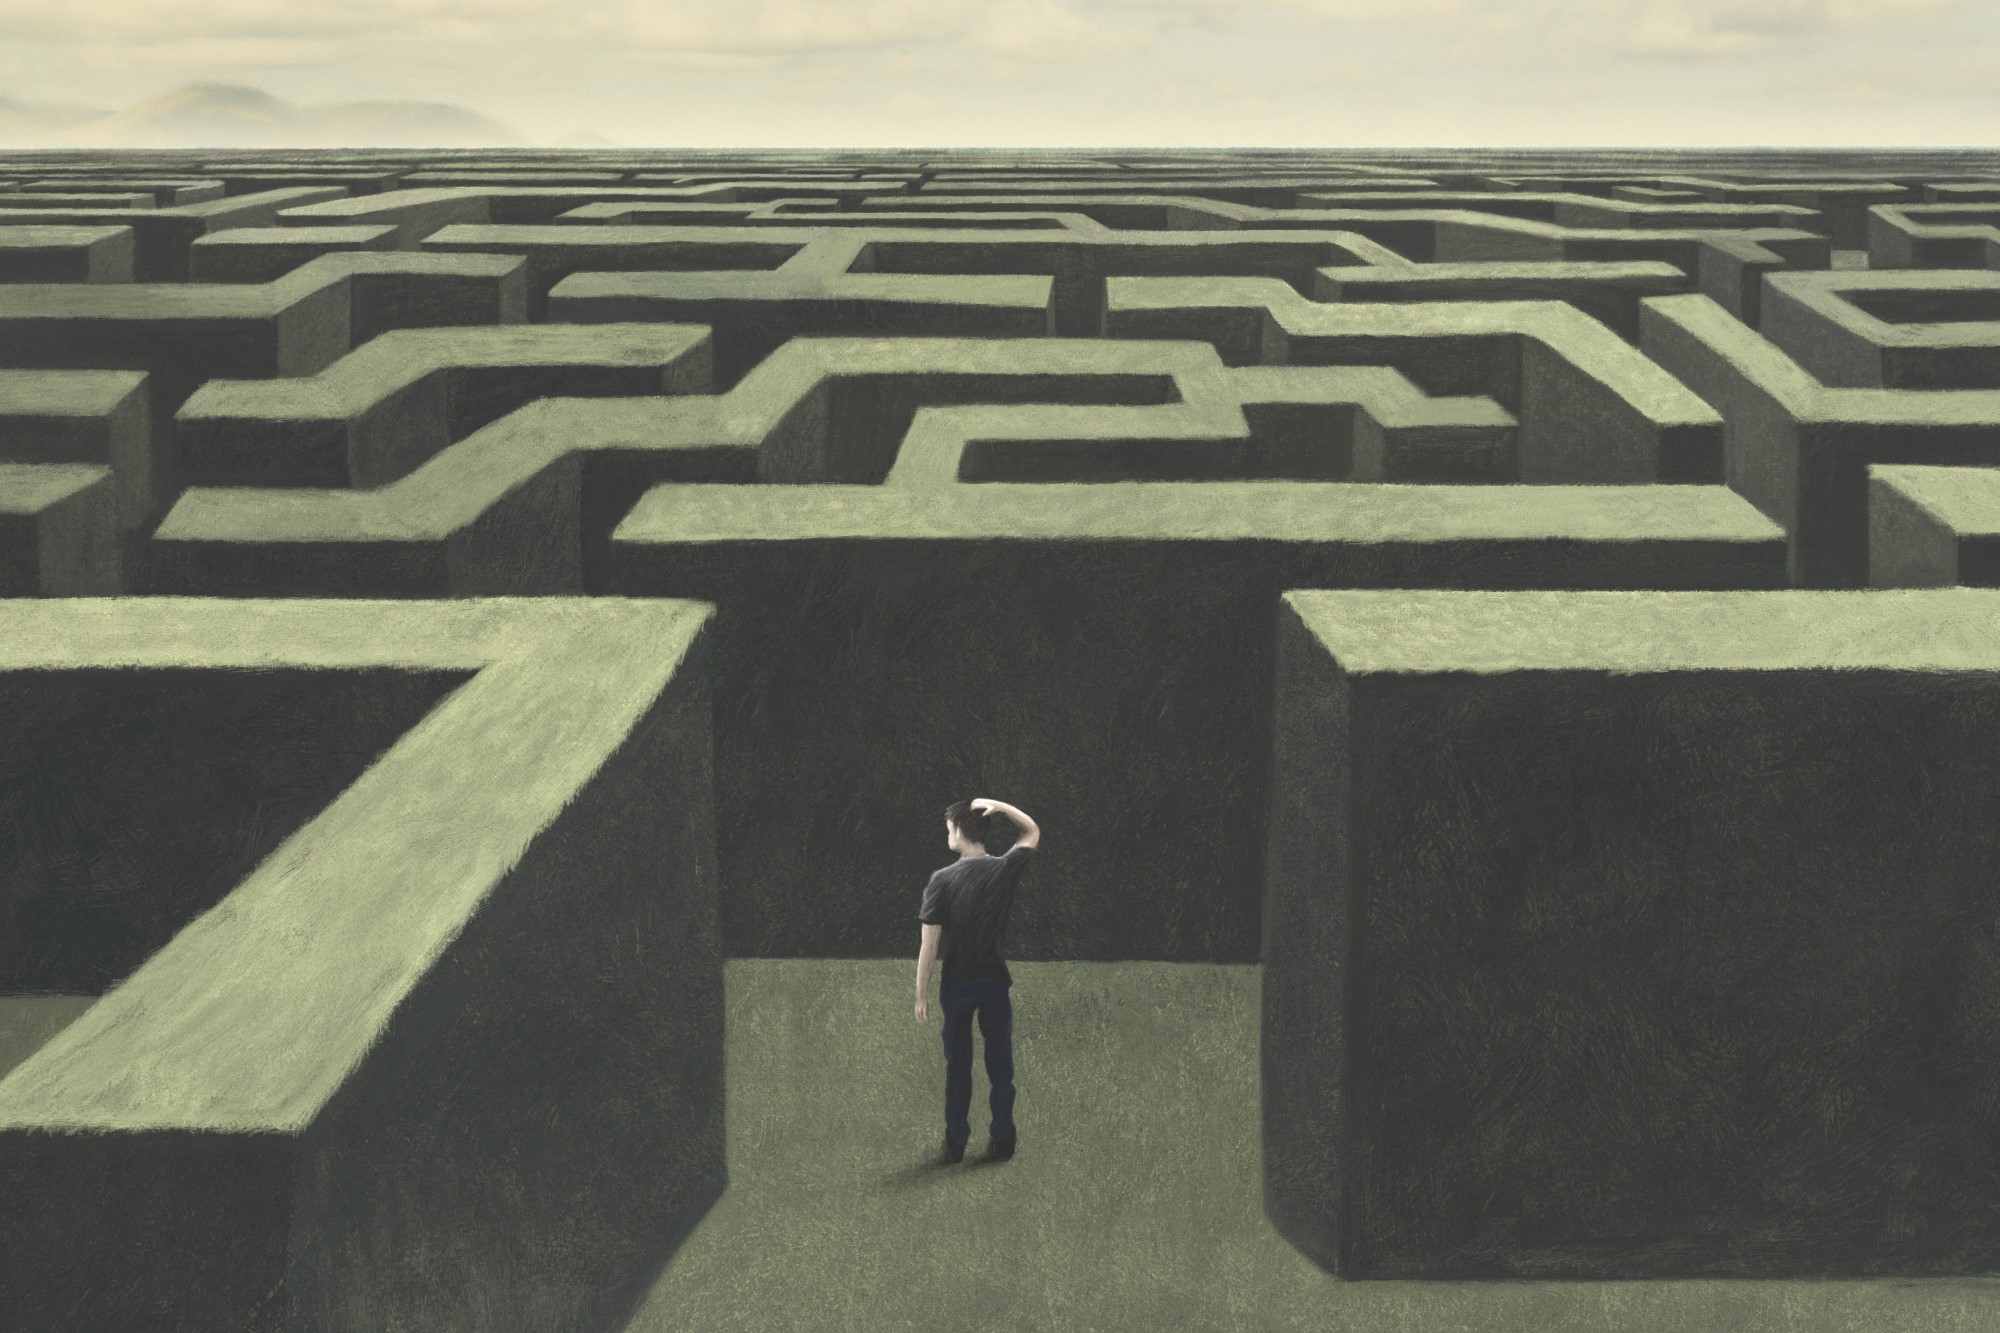 Search marketing in greenville - Illustration of man lost in a complex labyrinth, surreal abstract concept